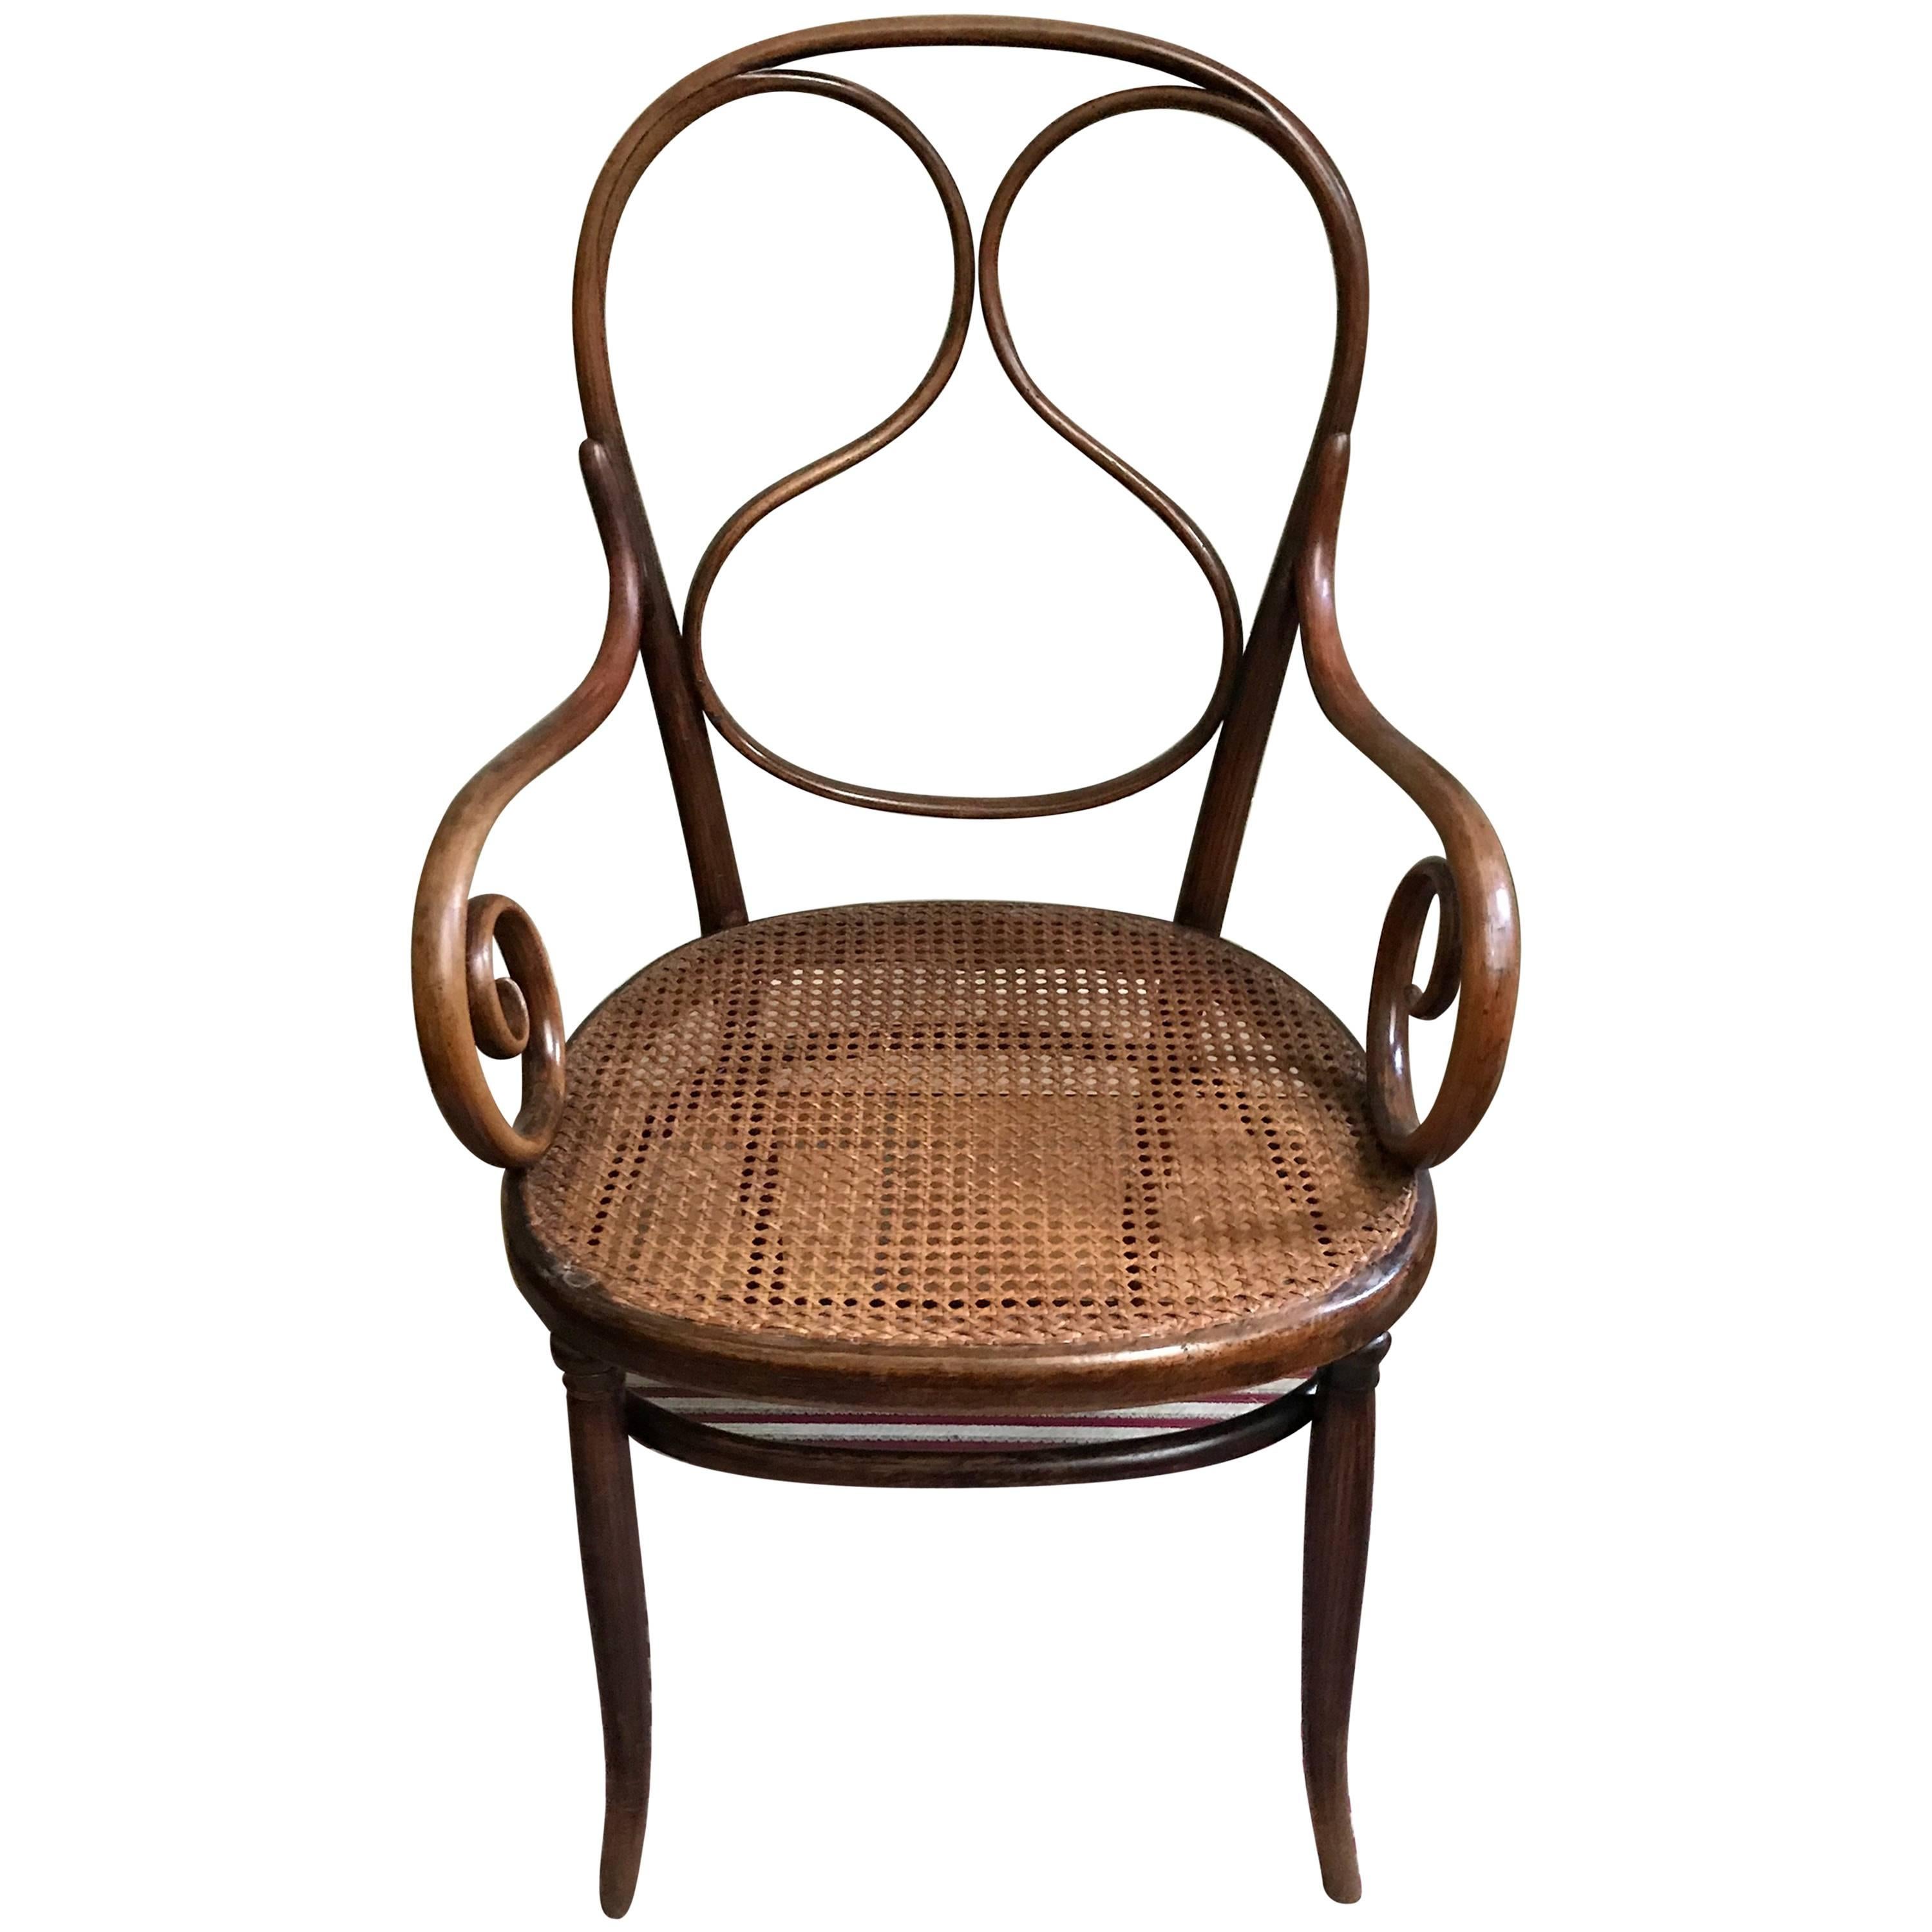 Armchair Thonet bentwood  Nr 1 First Design Splitted Beech Thin Back, 1865 For Sale